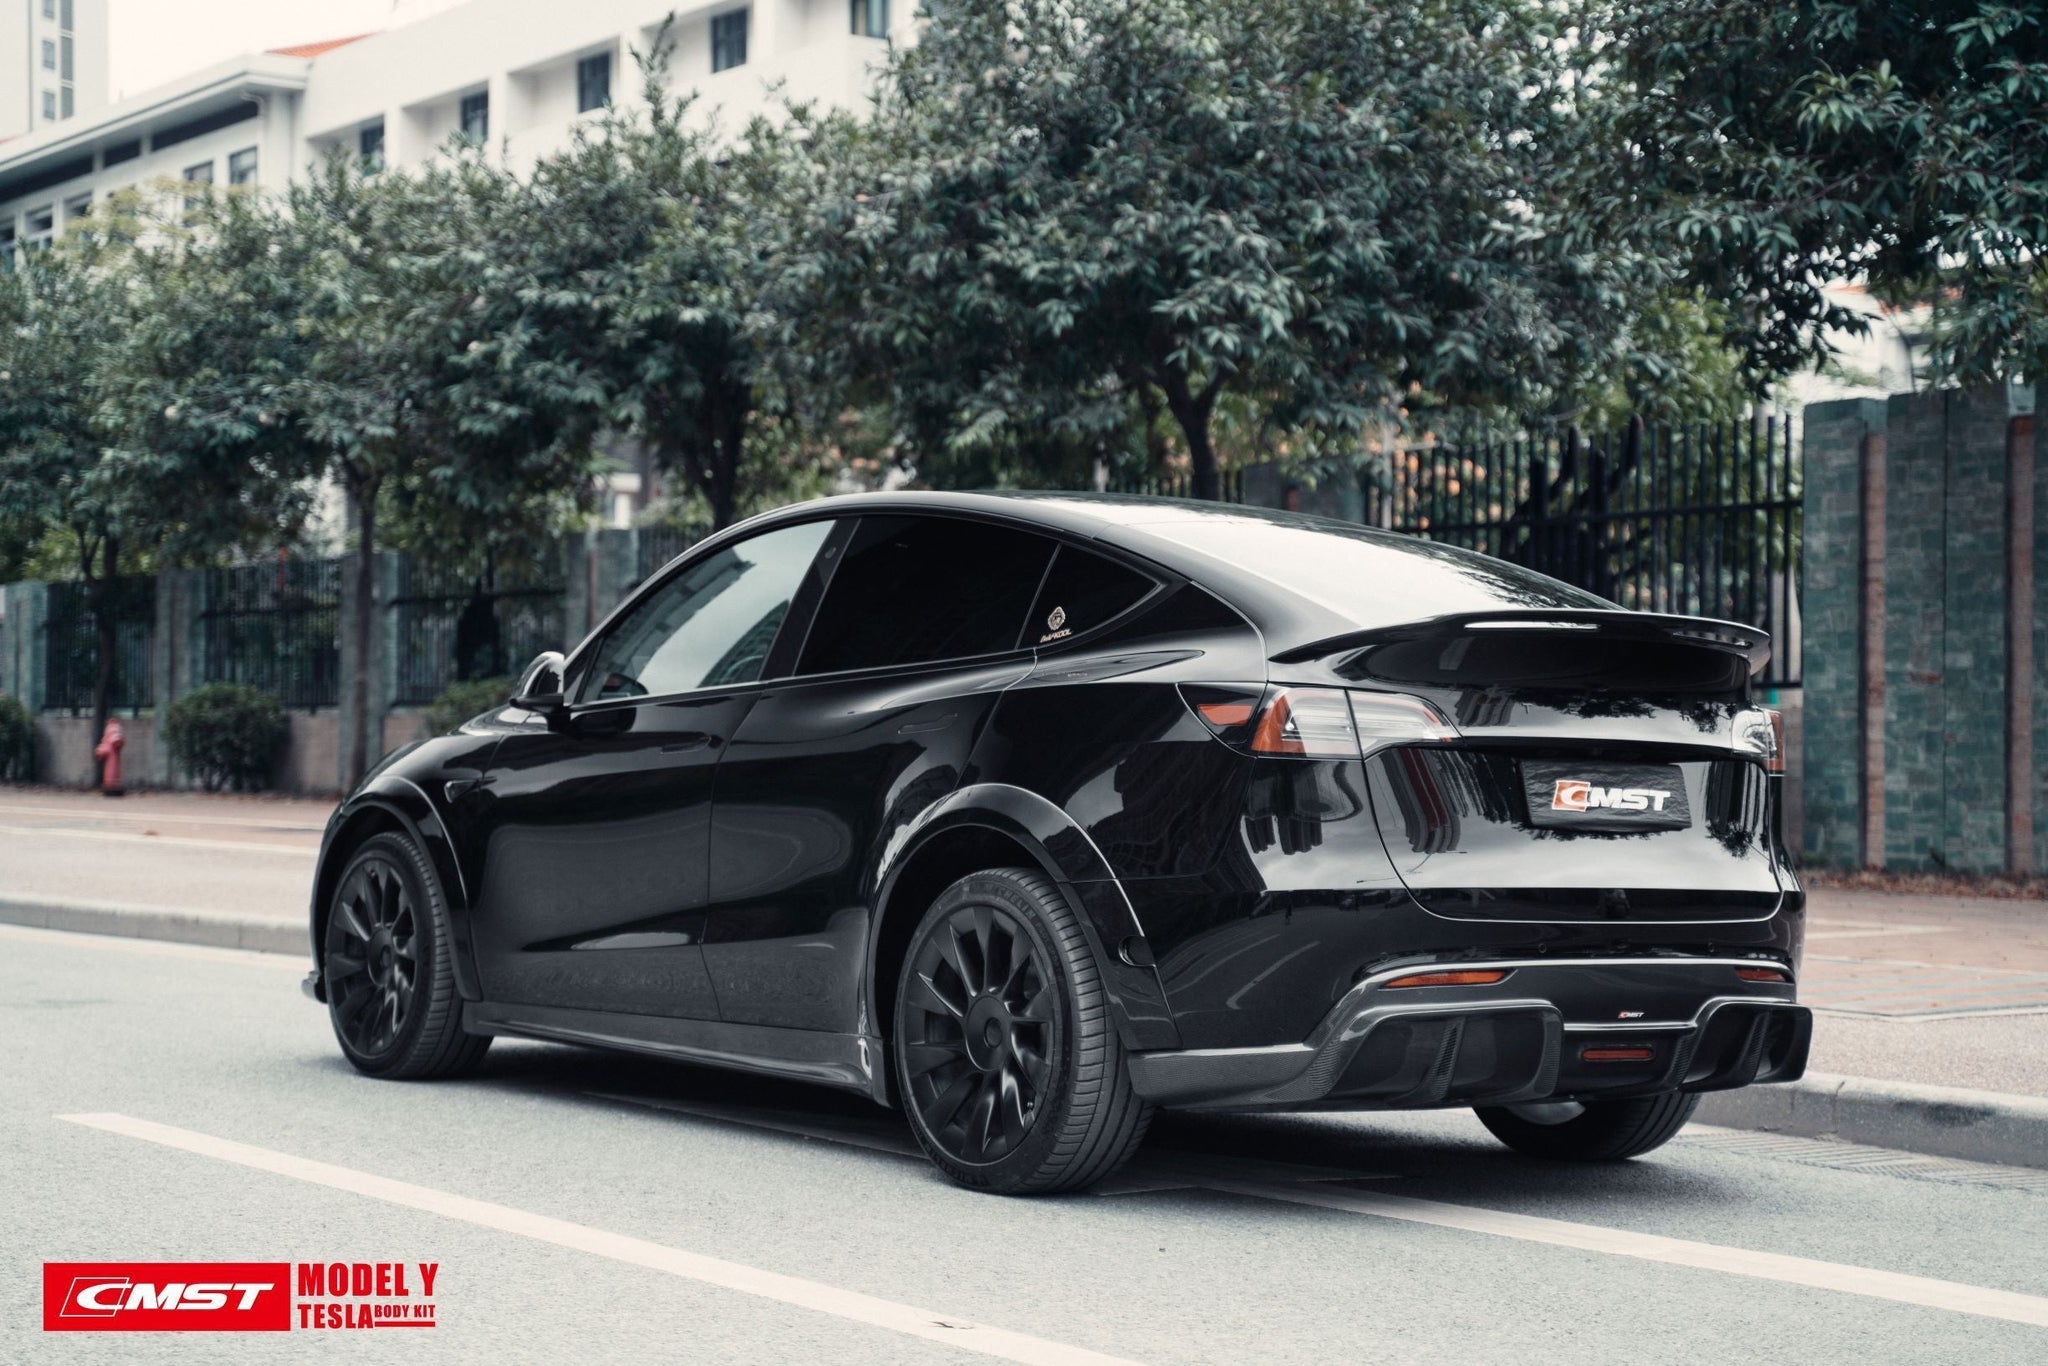 Check our price and buy CMST Carbon Fiber Body Kit set for Tesla Model Y!